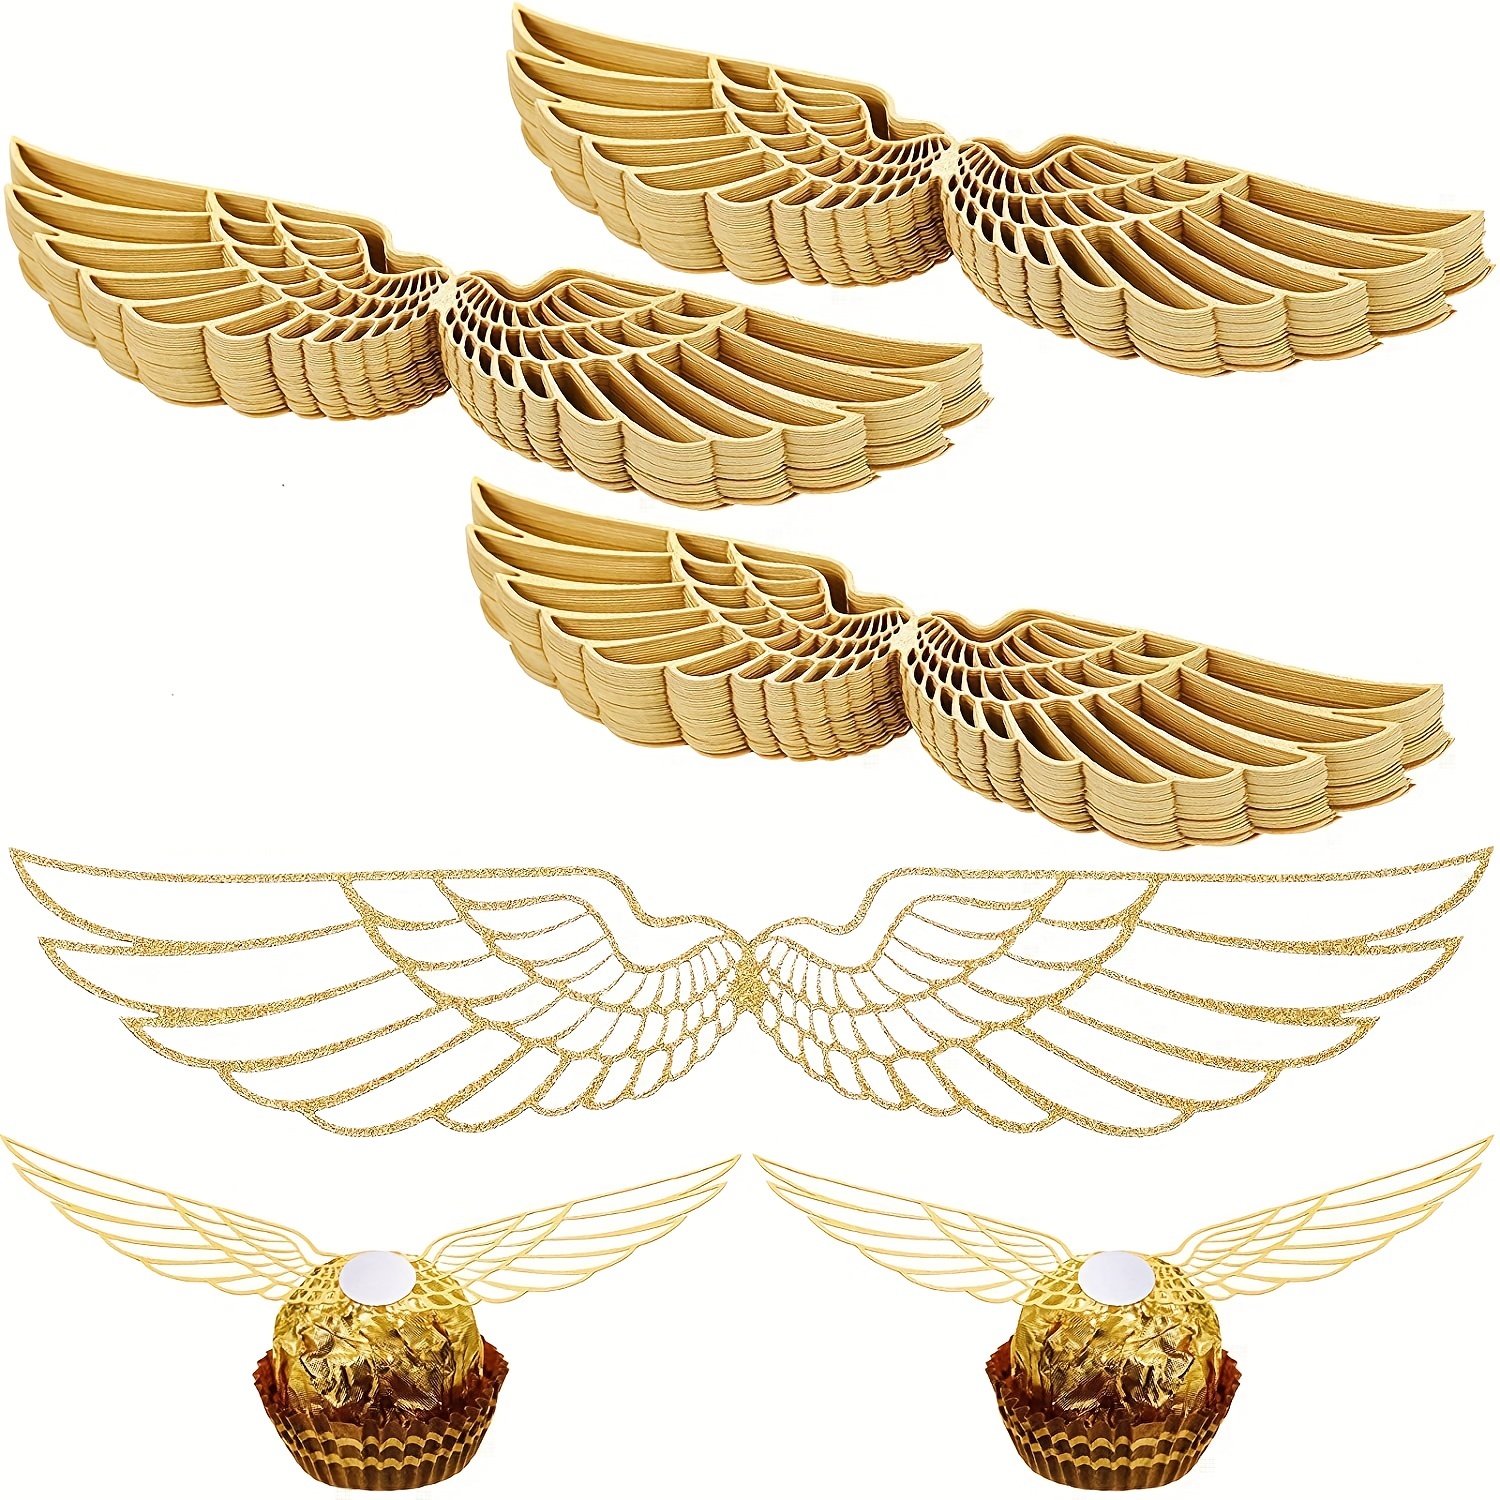 50PCS Wizard Party Chocolate Decoration Golden Snitch Wings